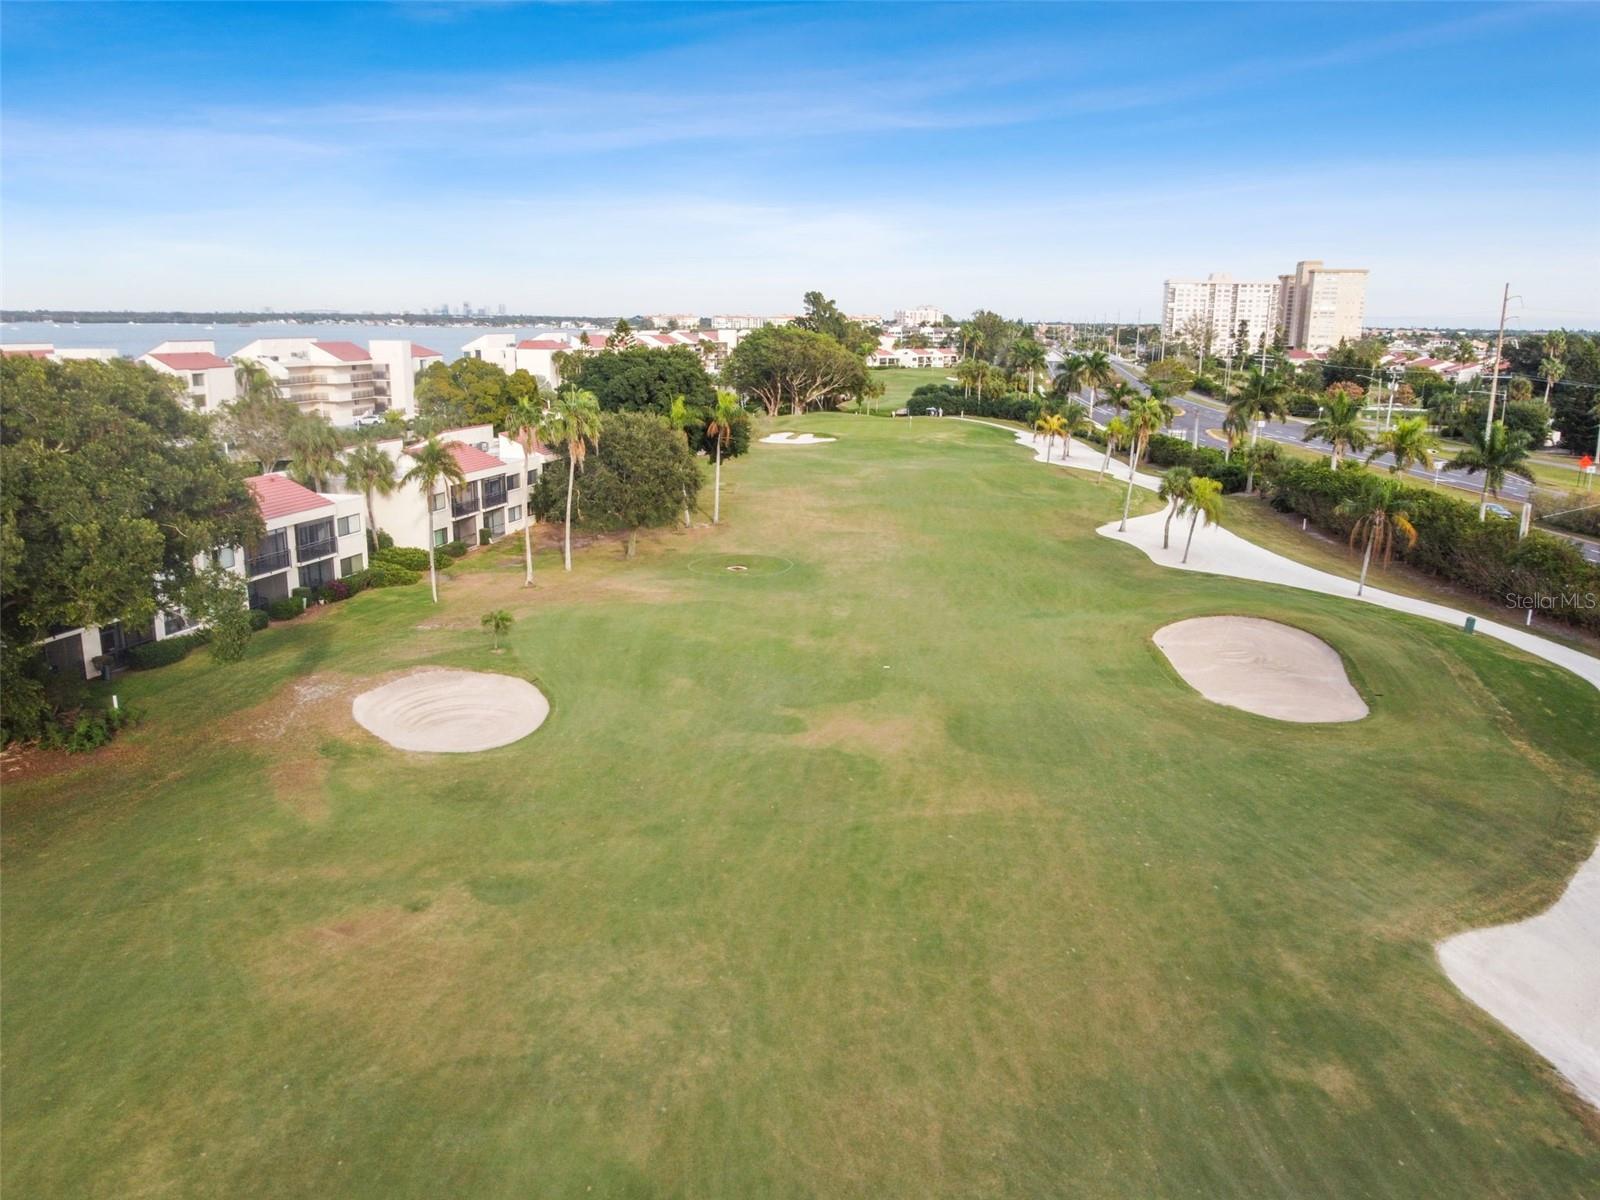 Isla del Sol golf course is right outside your home